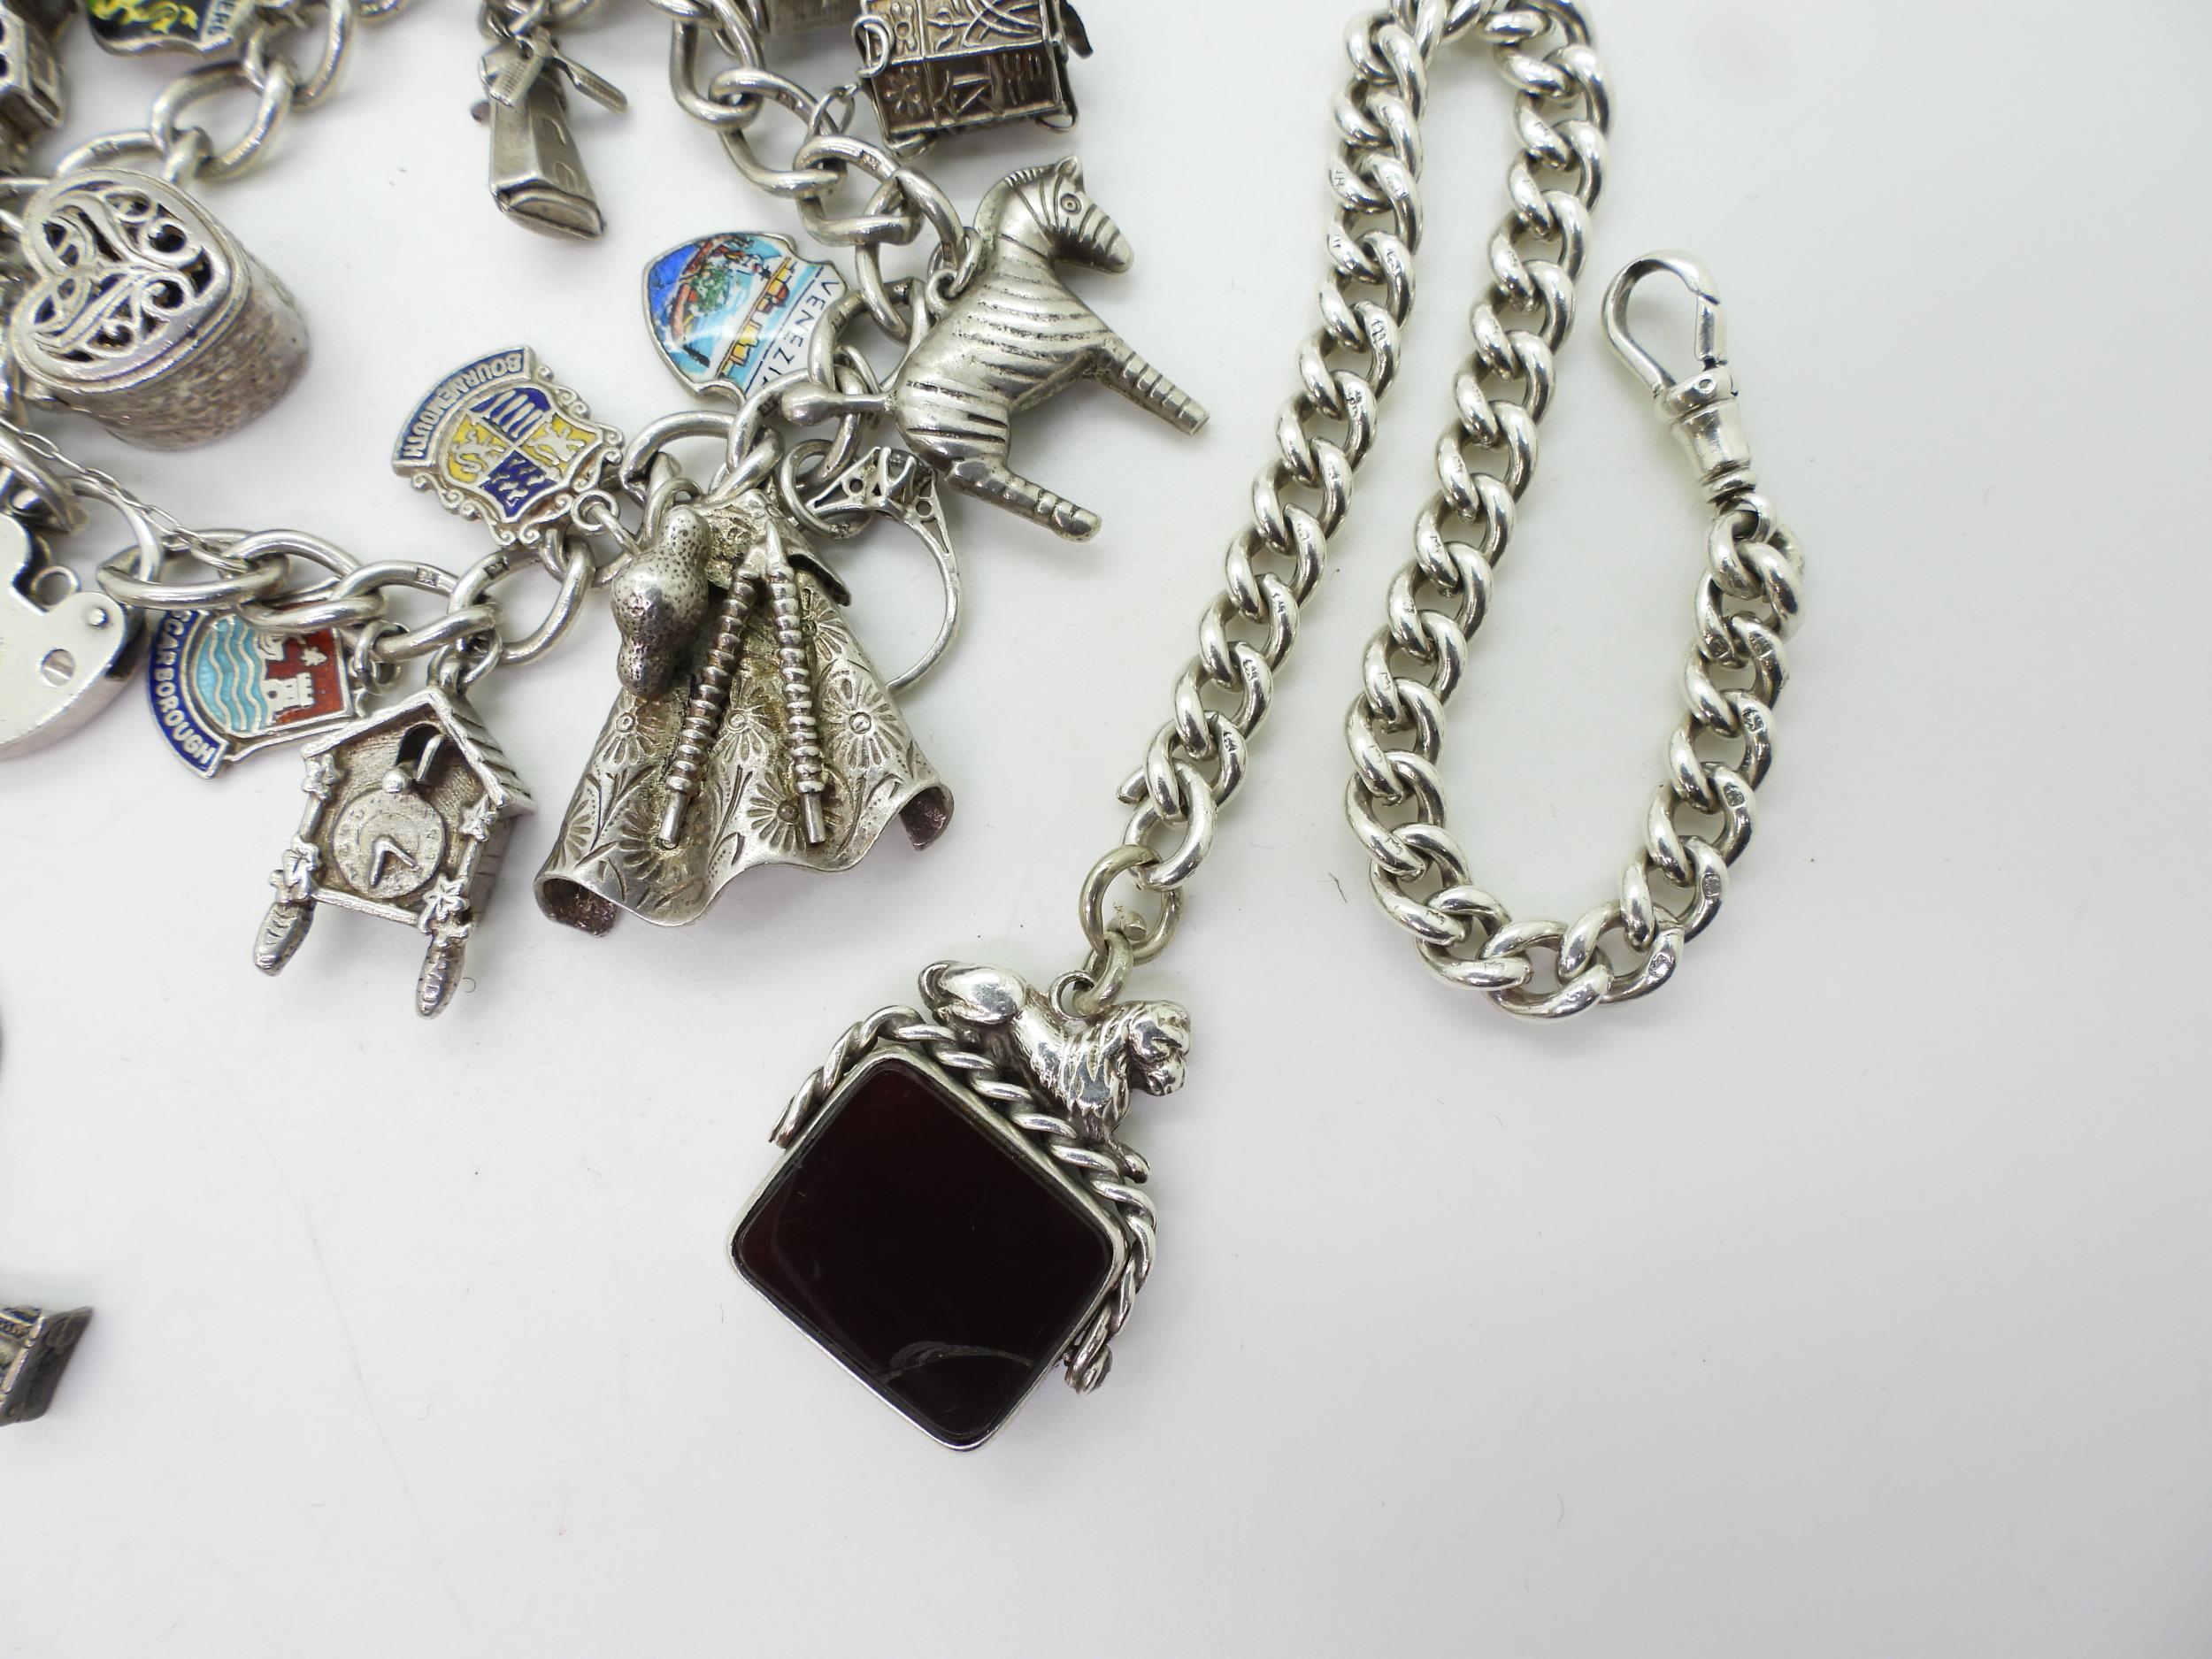 Two silver and white metal charm bracelets together with a silver fob chain bracelet with attached - Image 2 of 3